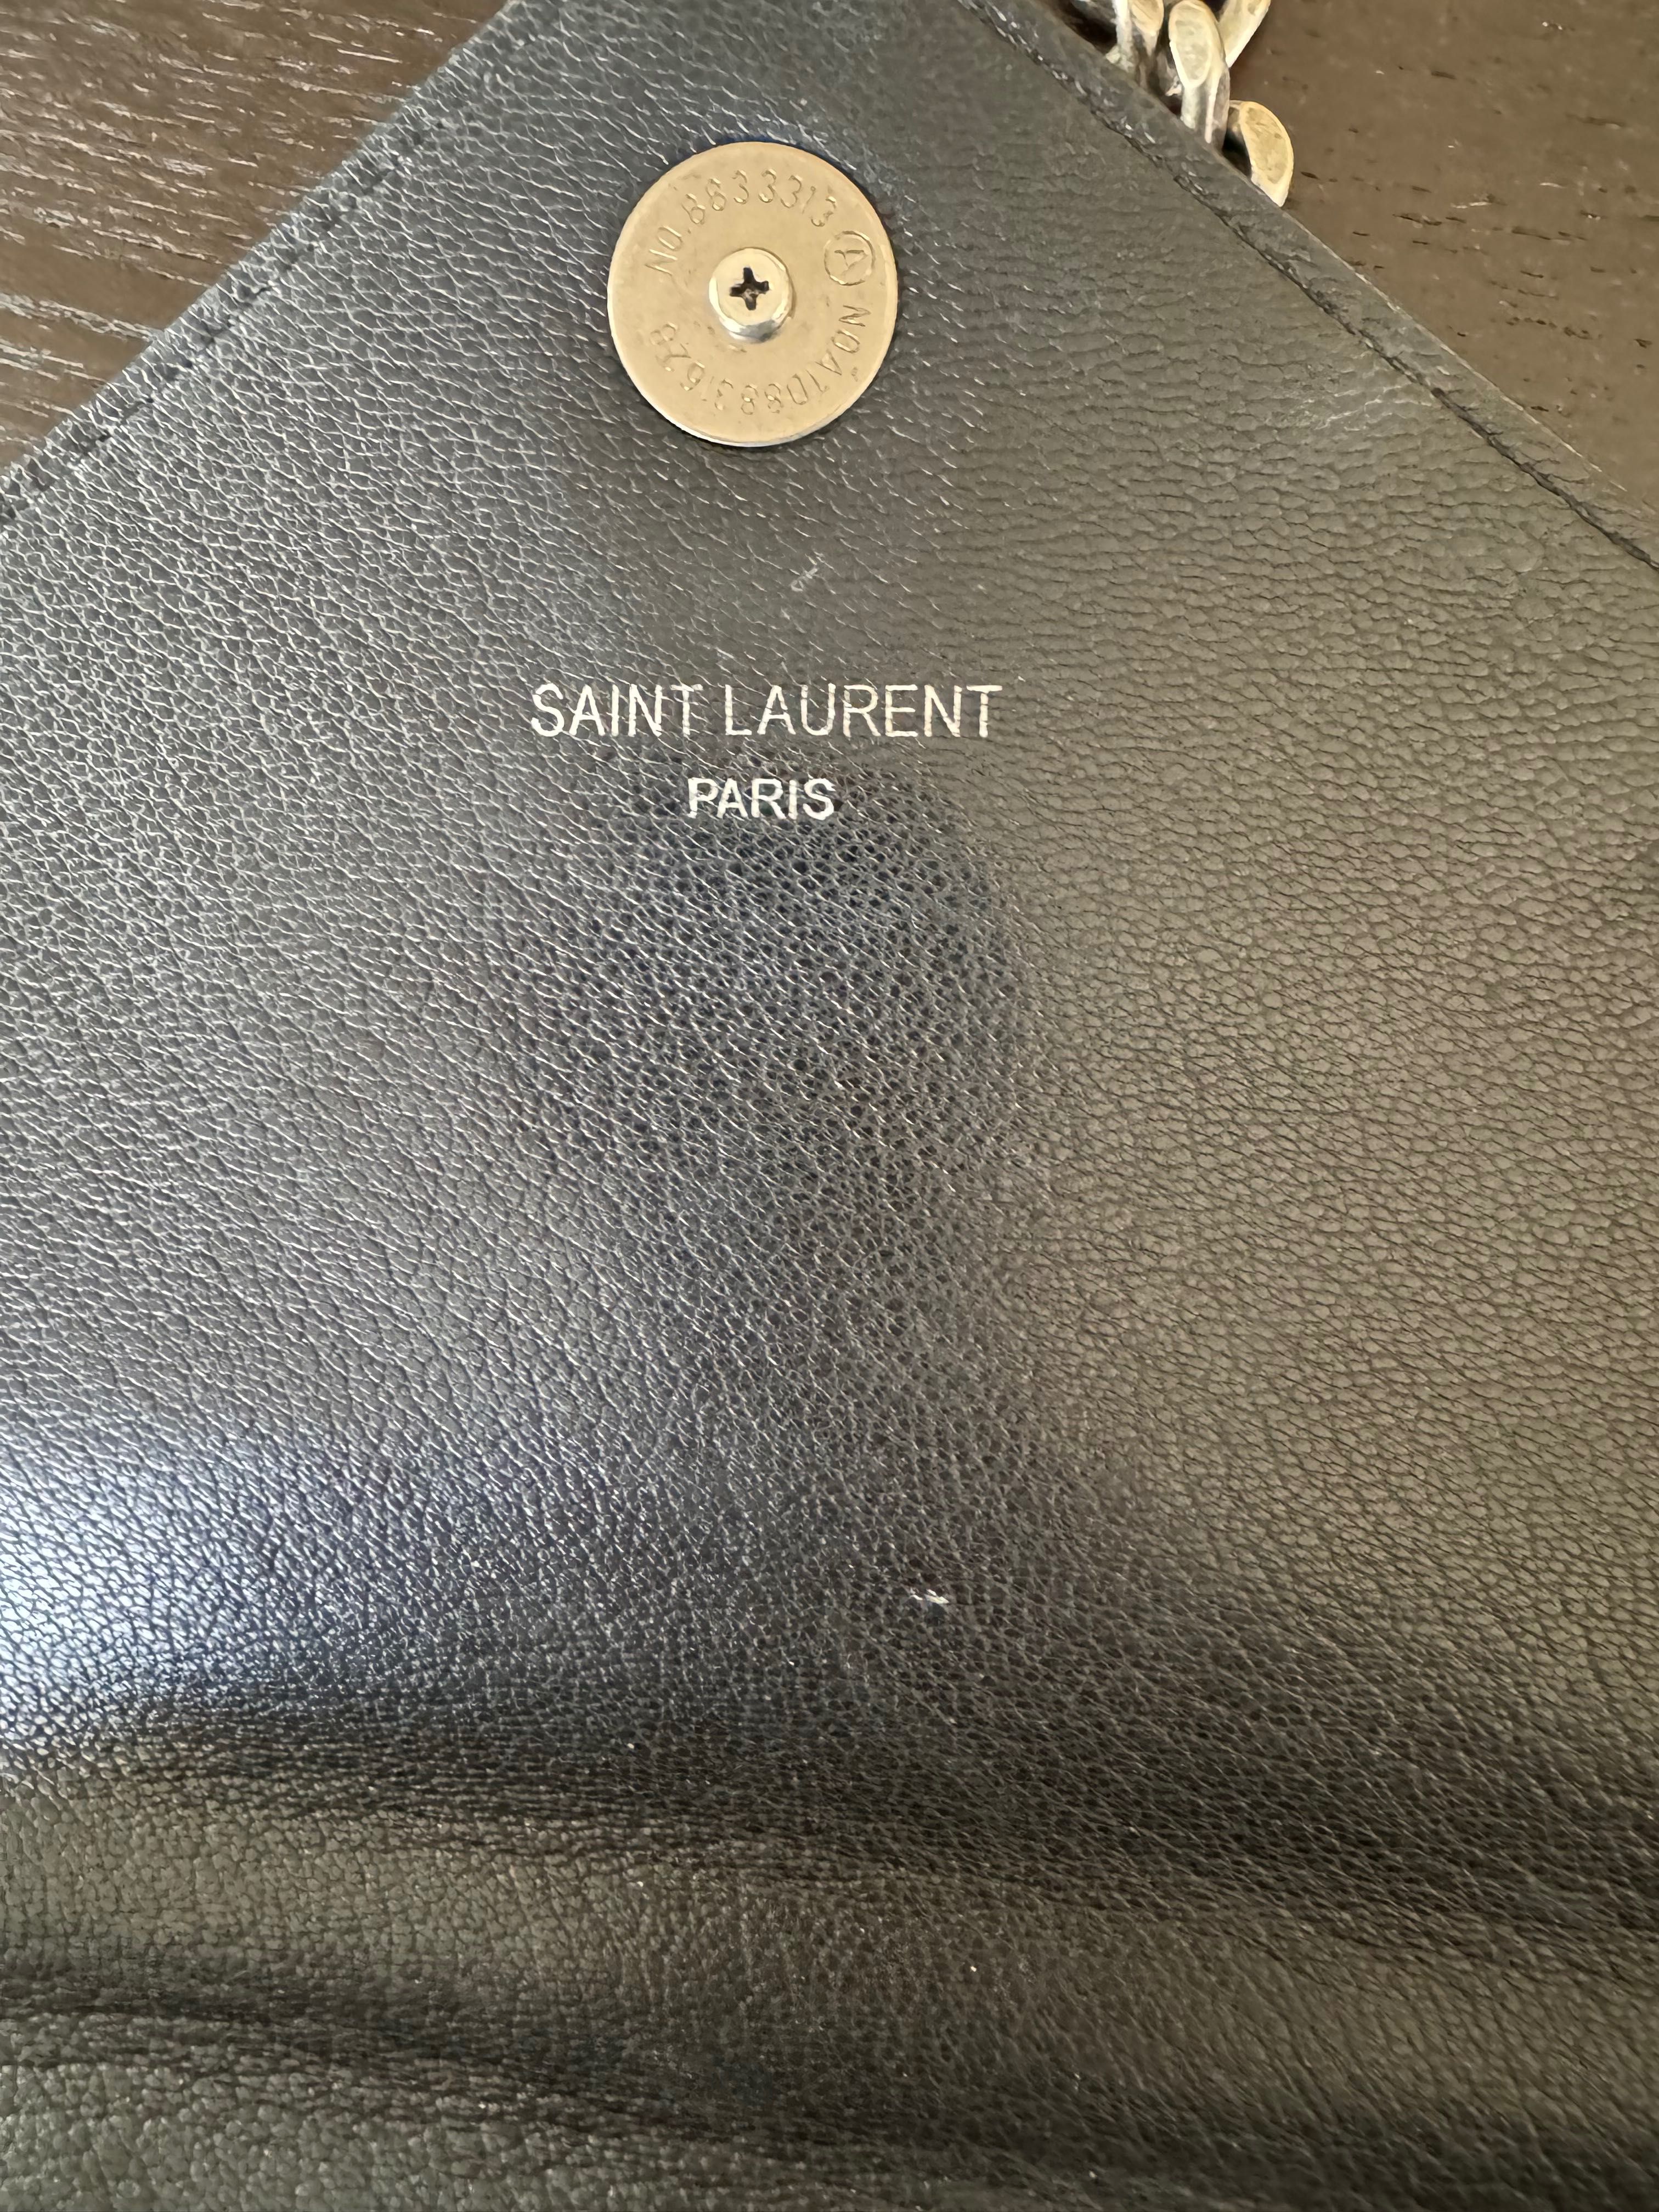 Ysl leather black bag, used but in good condition.